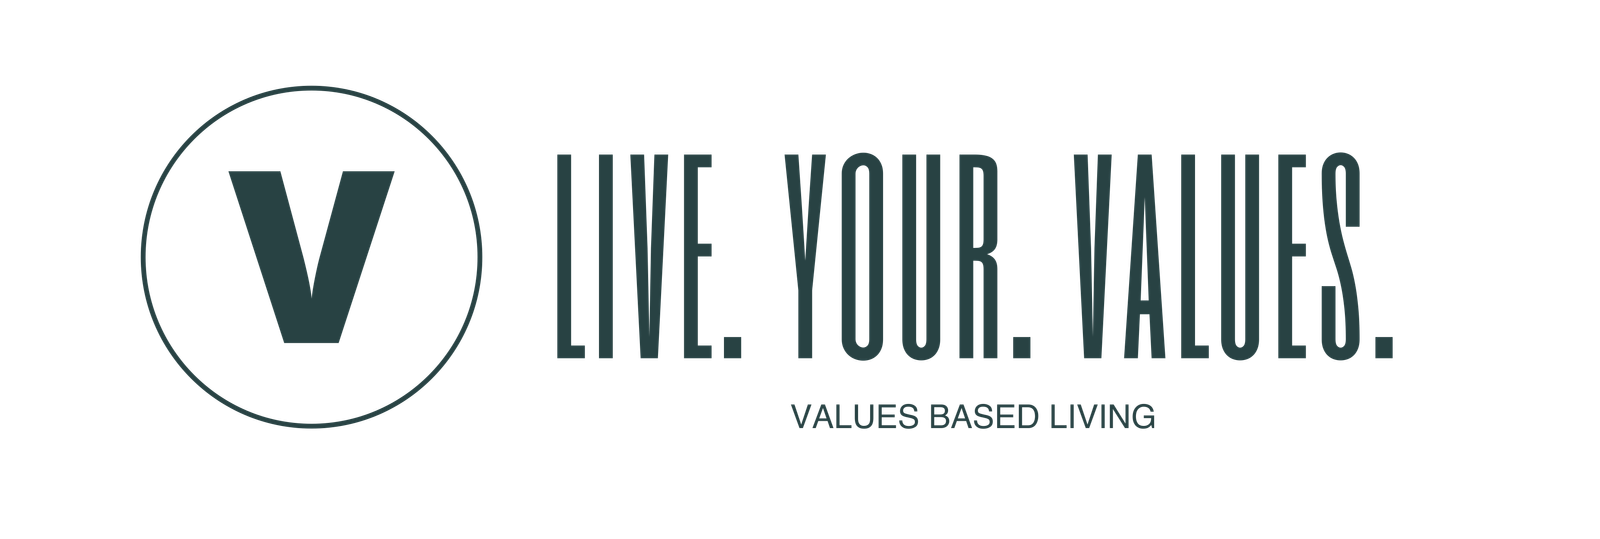 Live Your Values.